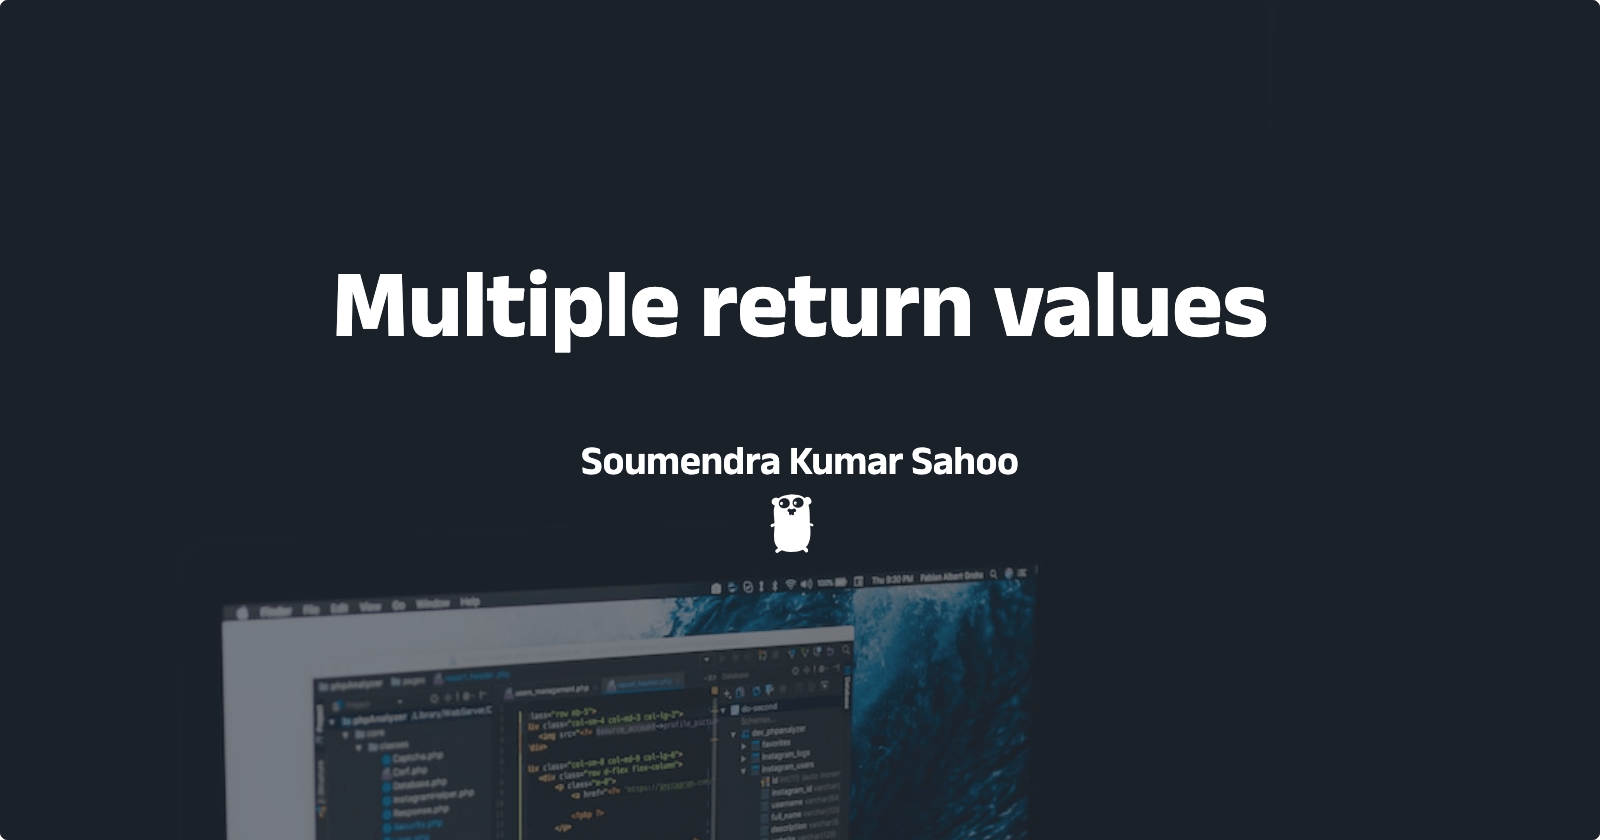 Multiple return values from a function